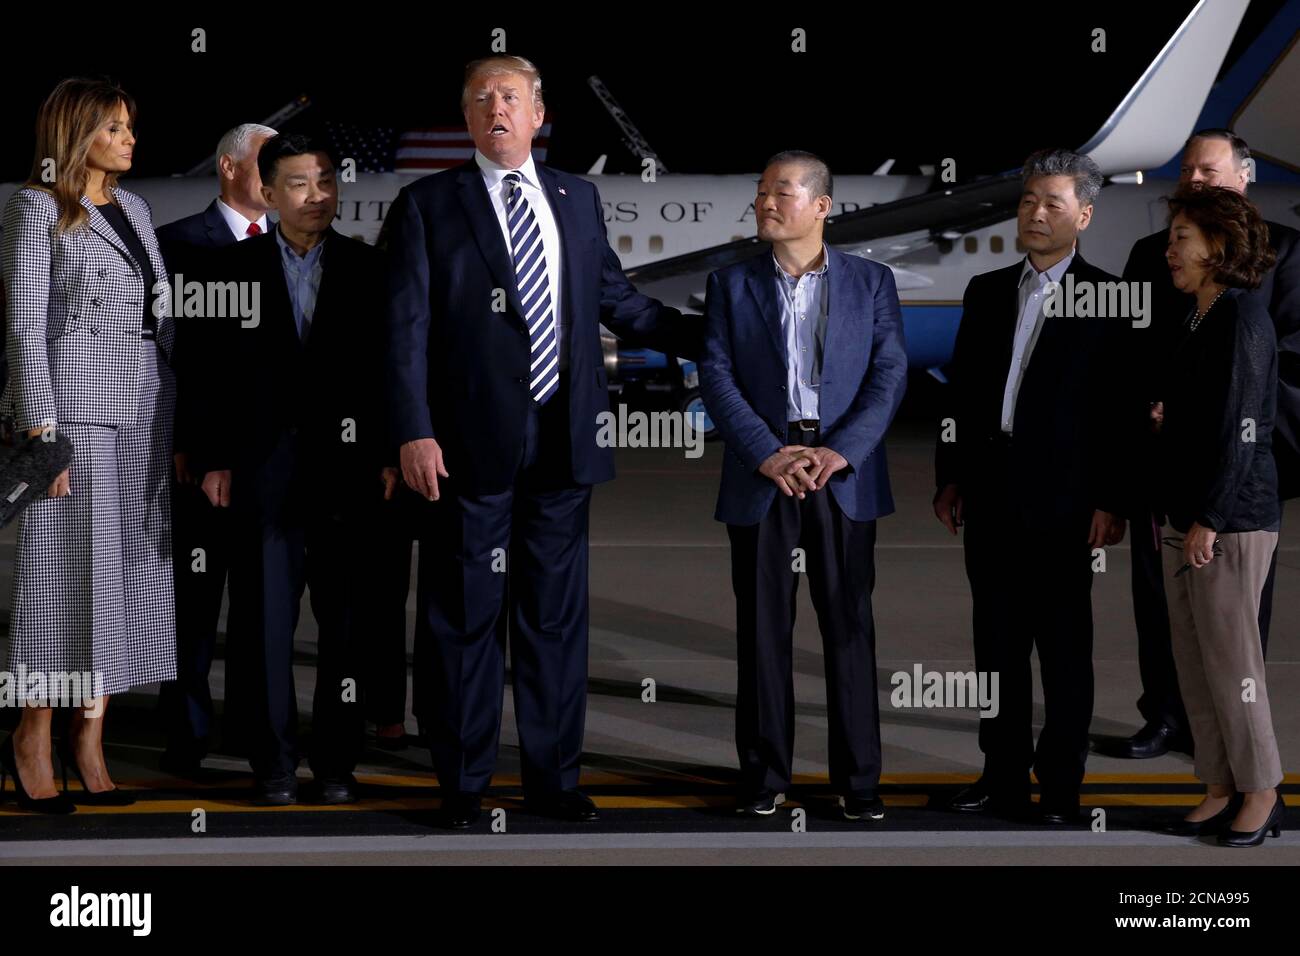 U.S.President Donald Trump speaks to the media next to the Americans released from detention in North Korea, Tony Kim, Kim Hak-song and Kim Dong-chul, upon their arrival at Joint Base Andrews, Maryland, U.S., May 10, 2018.  REUTERS/Jonathan Ernst Stock Photo